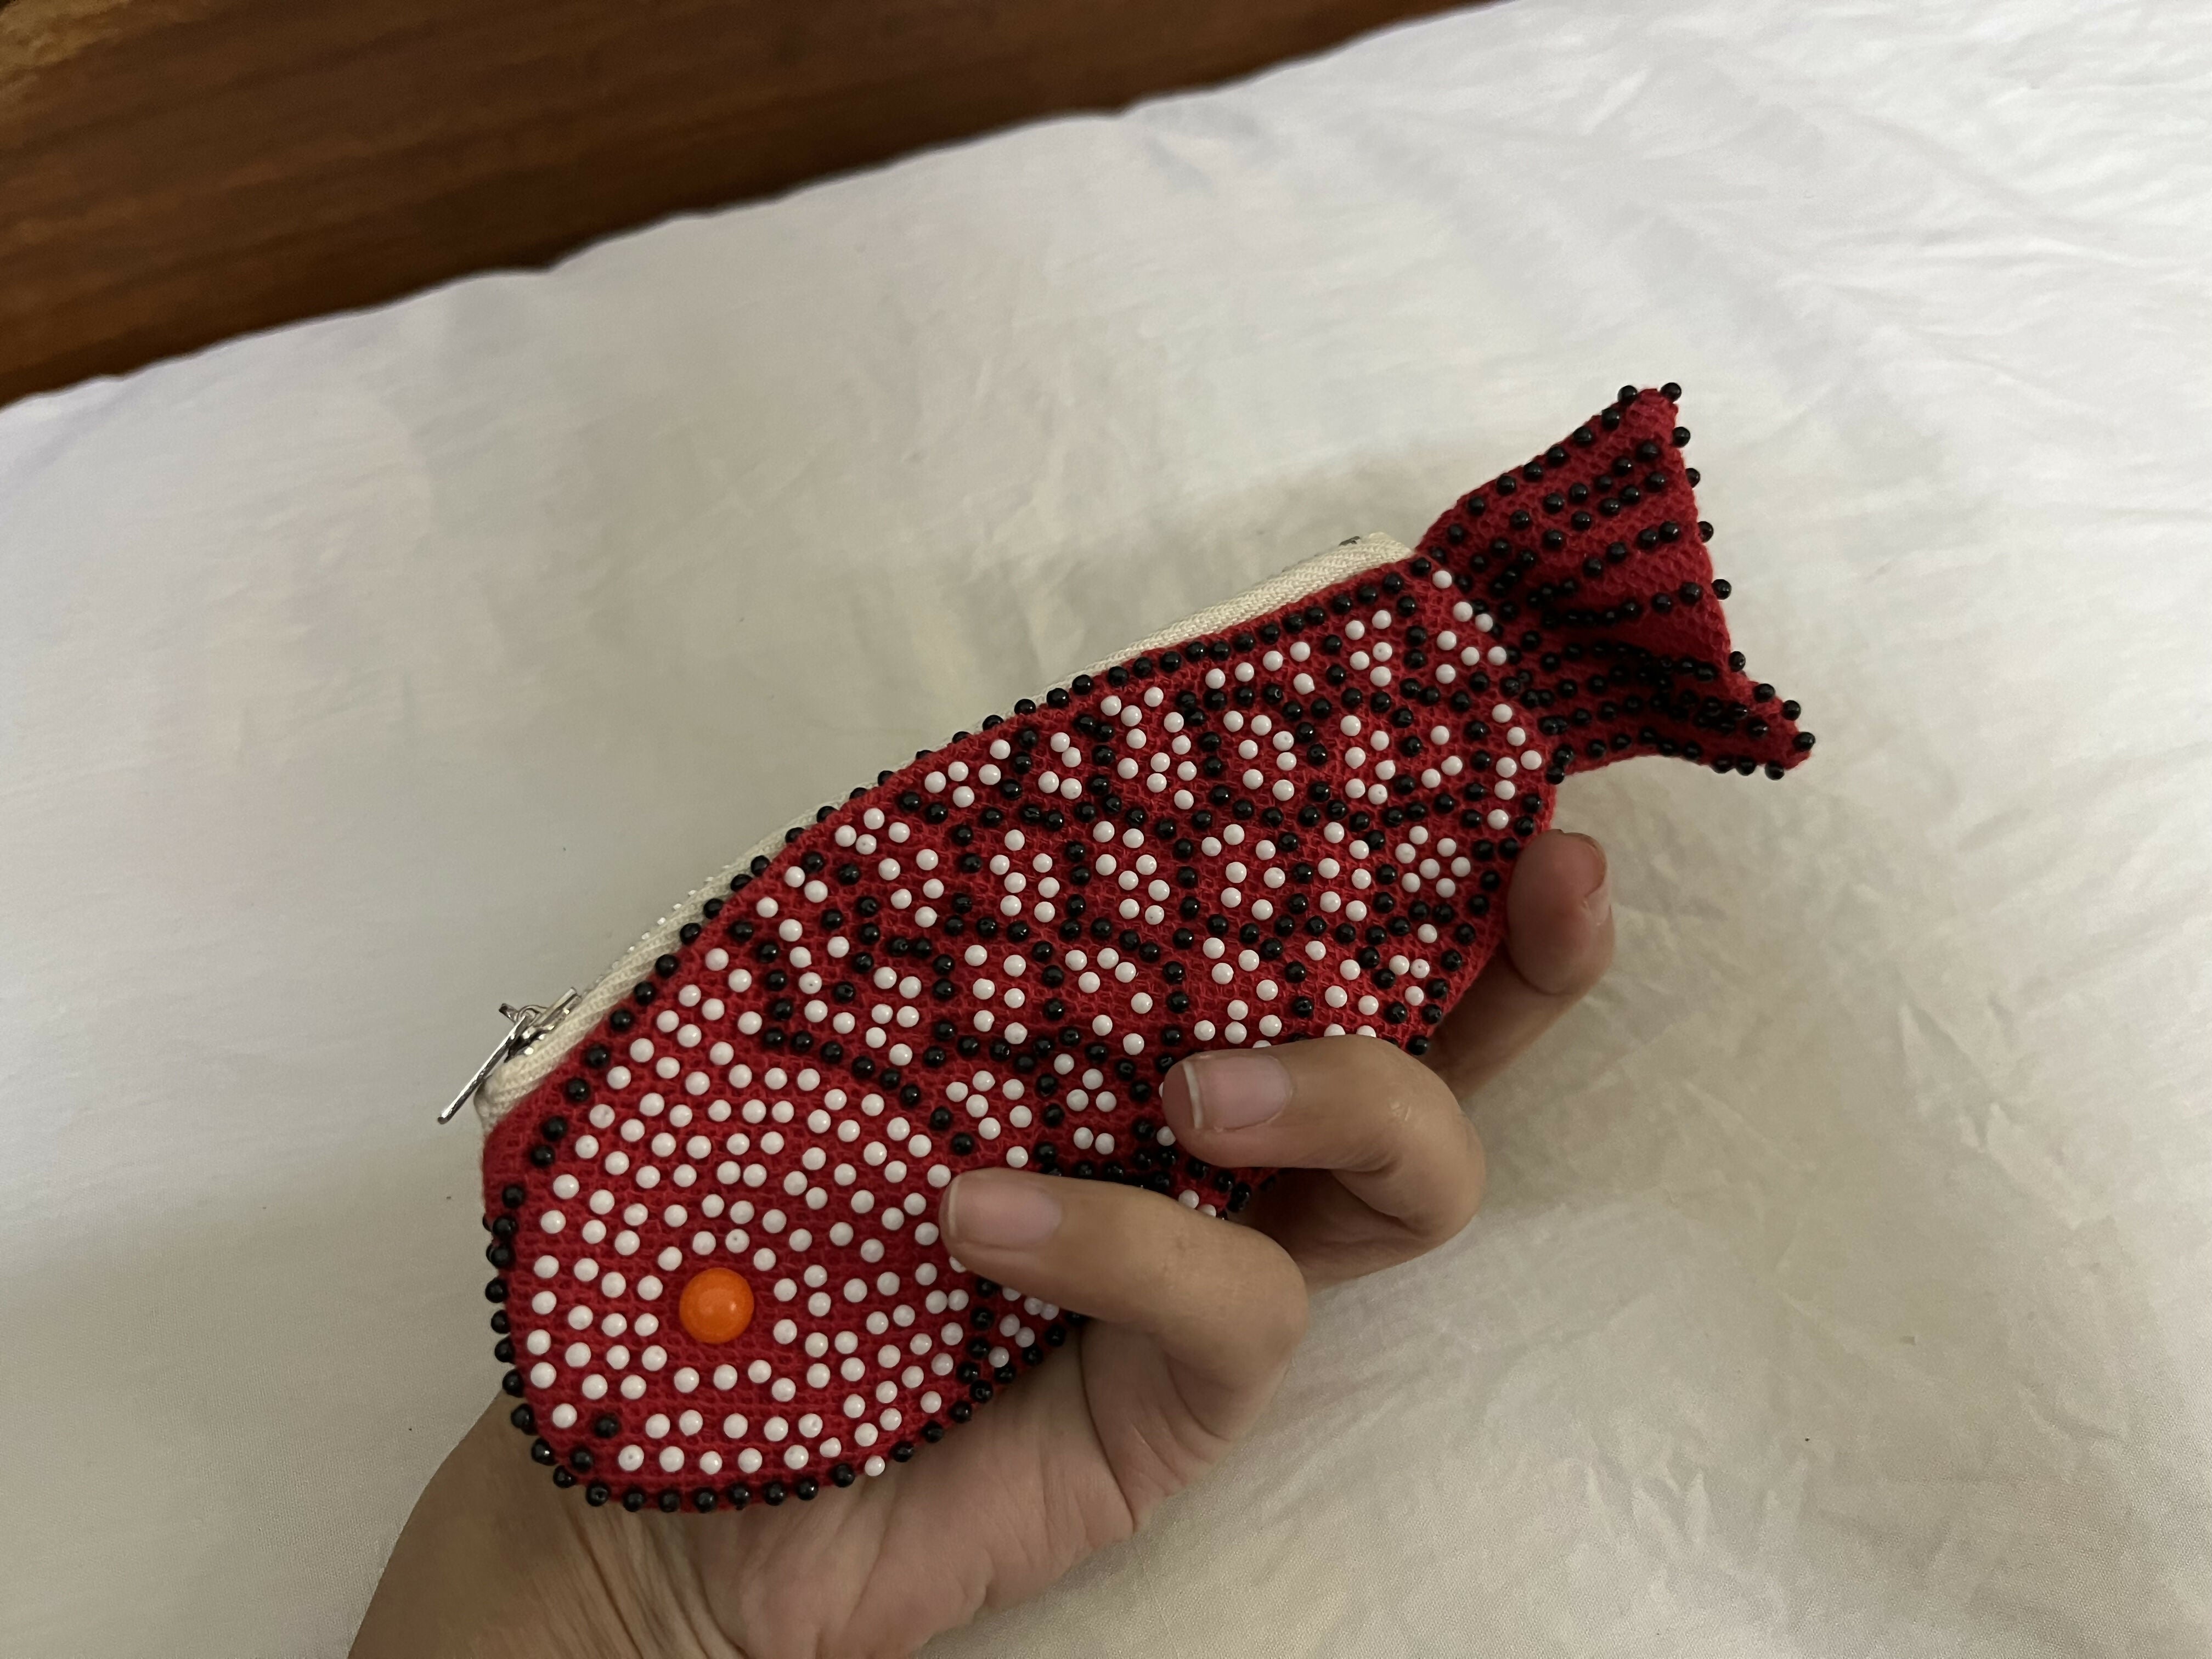 Imported from Qatar | Beaded Fish Pouch | Women Bags | Brand New with Tags